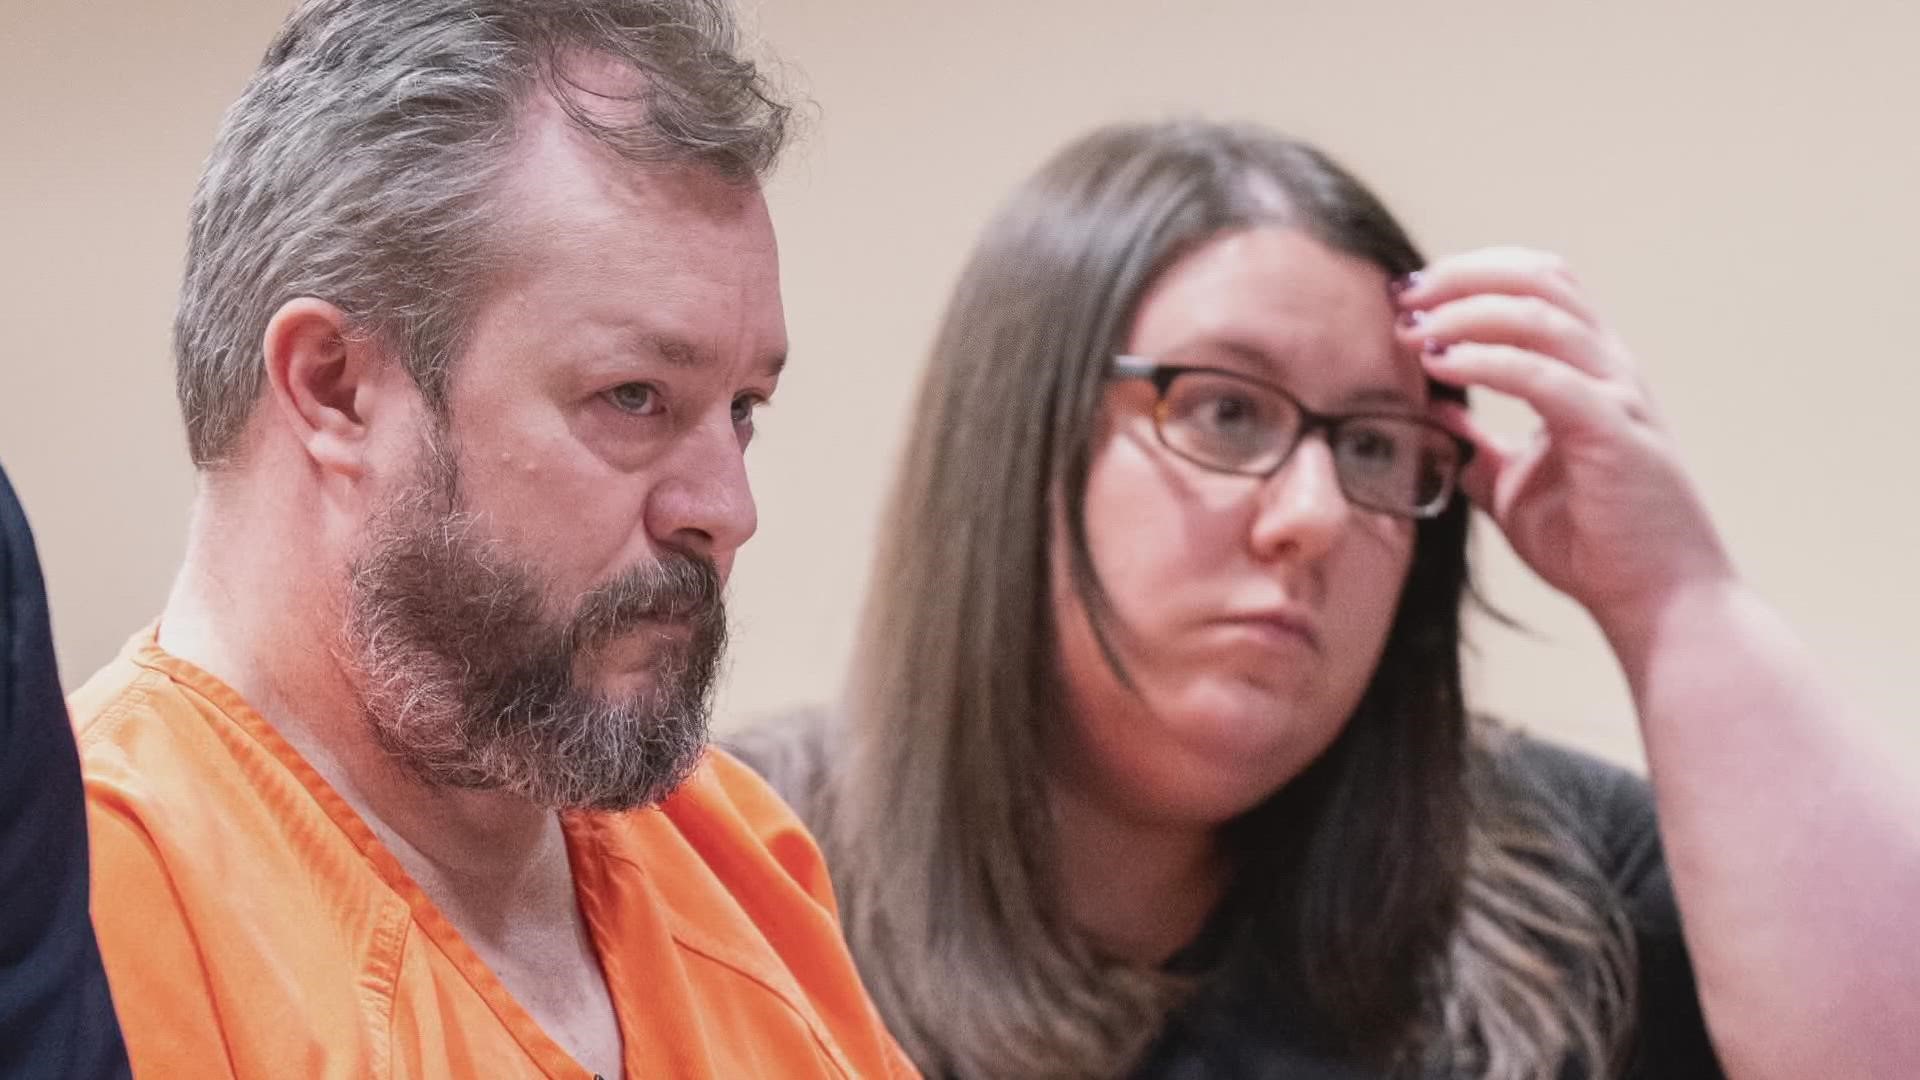 Last month, Richard Emery was found guilty of first-degree murder and 11 other charges for killing his girlfriend, Kate Kasten, her two children, and her mother.